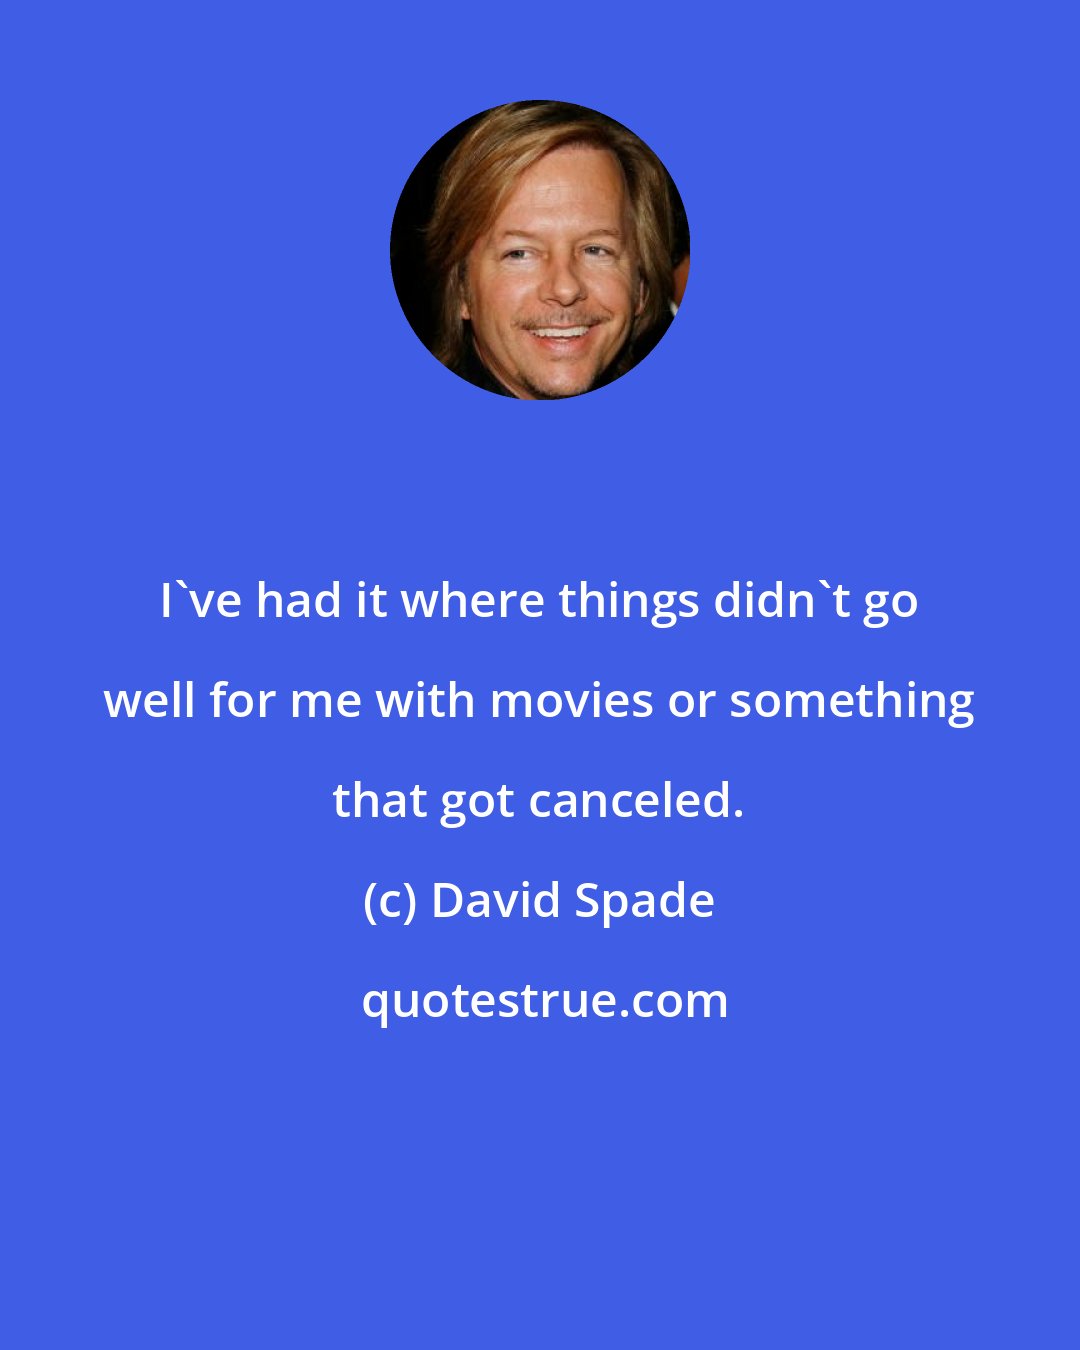 David Spade: I've had it where things didn't go well for me with movies or something that got canceled.